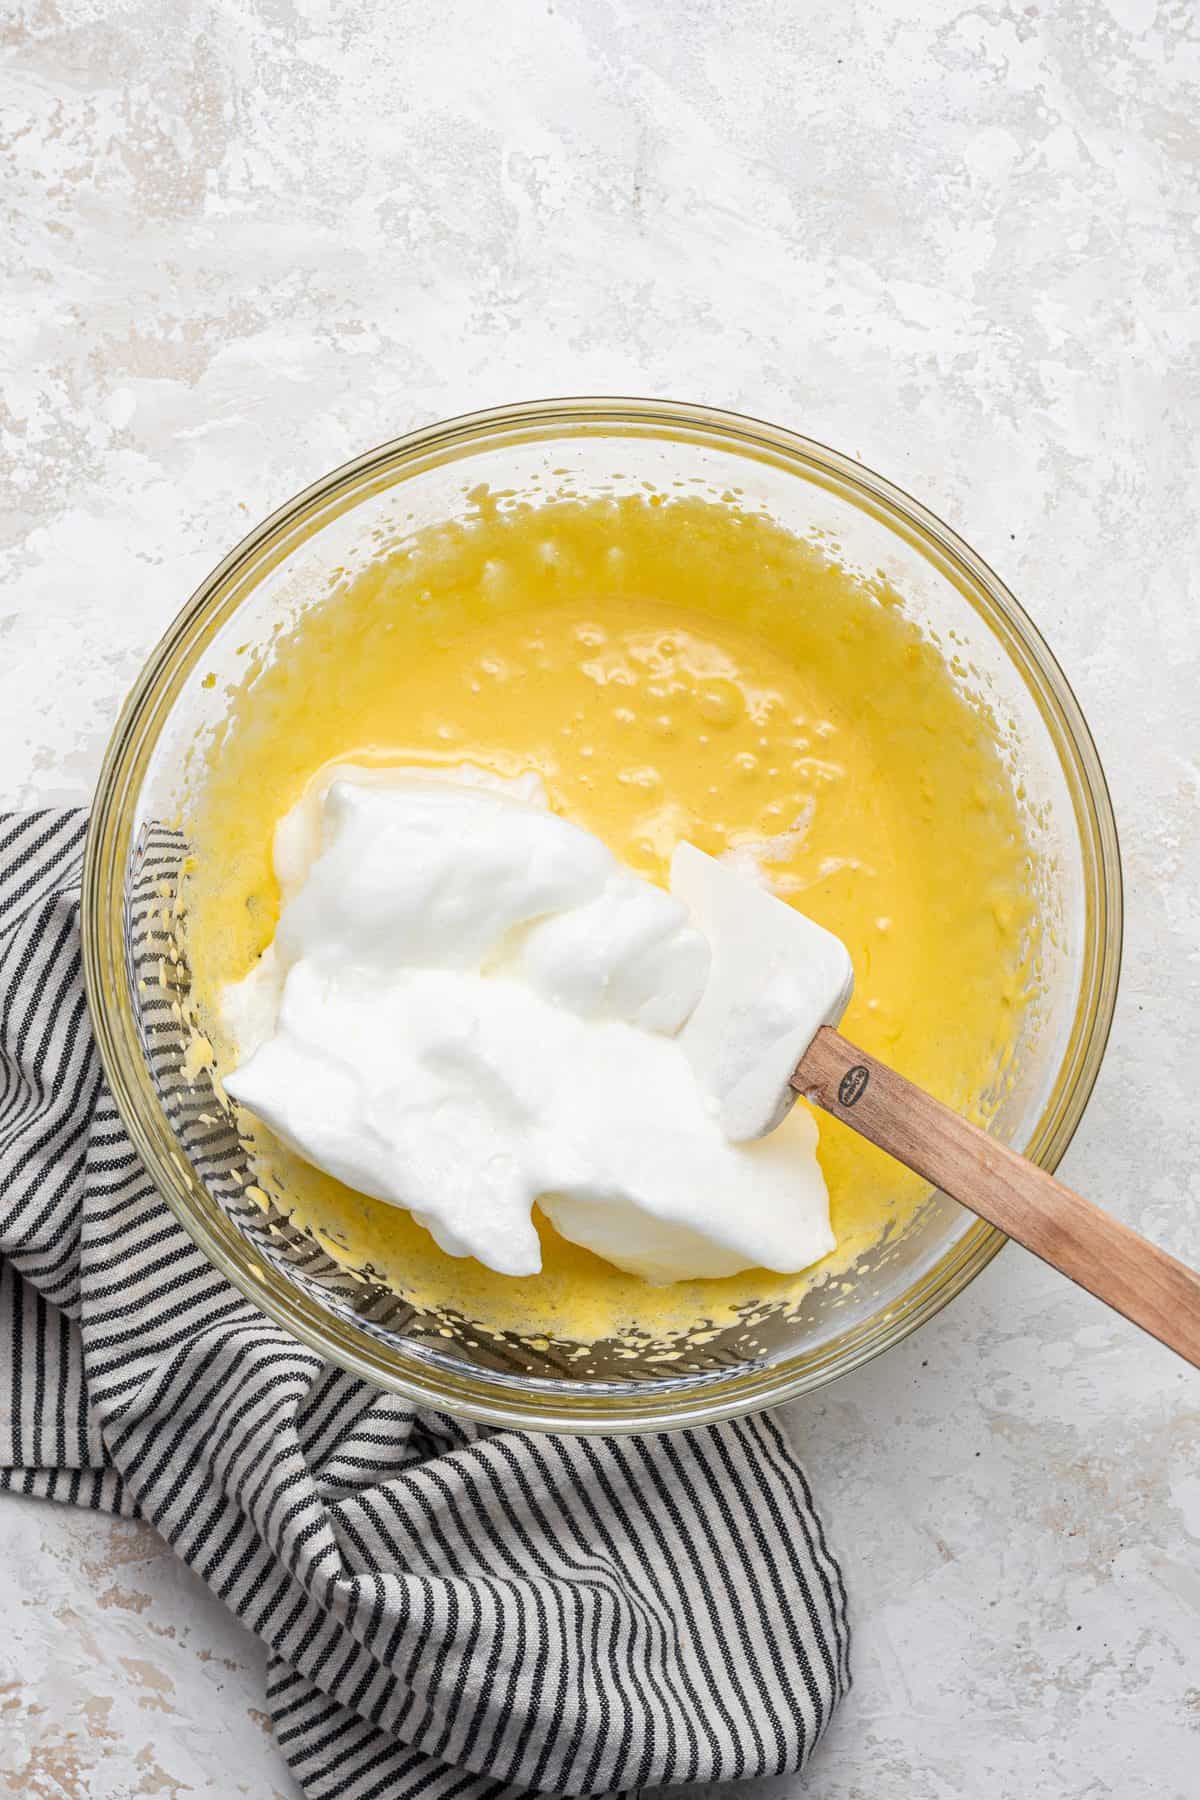 mixing the egg yolks with the whipped egg whites